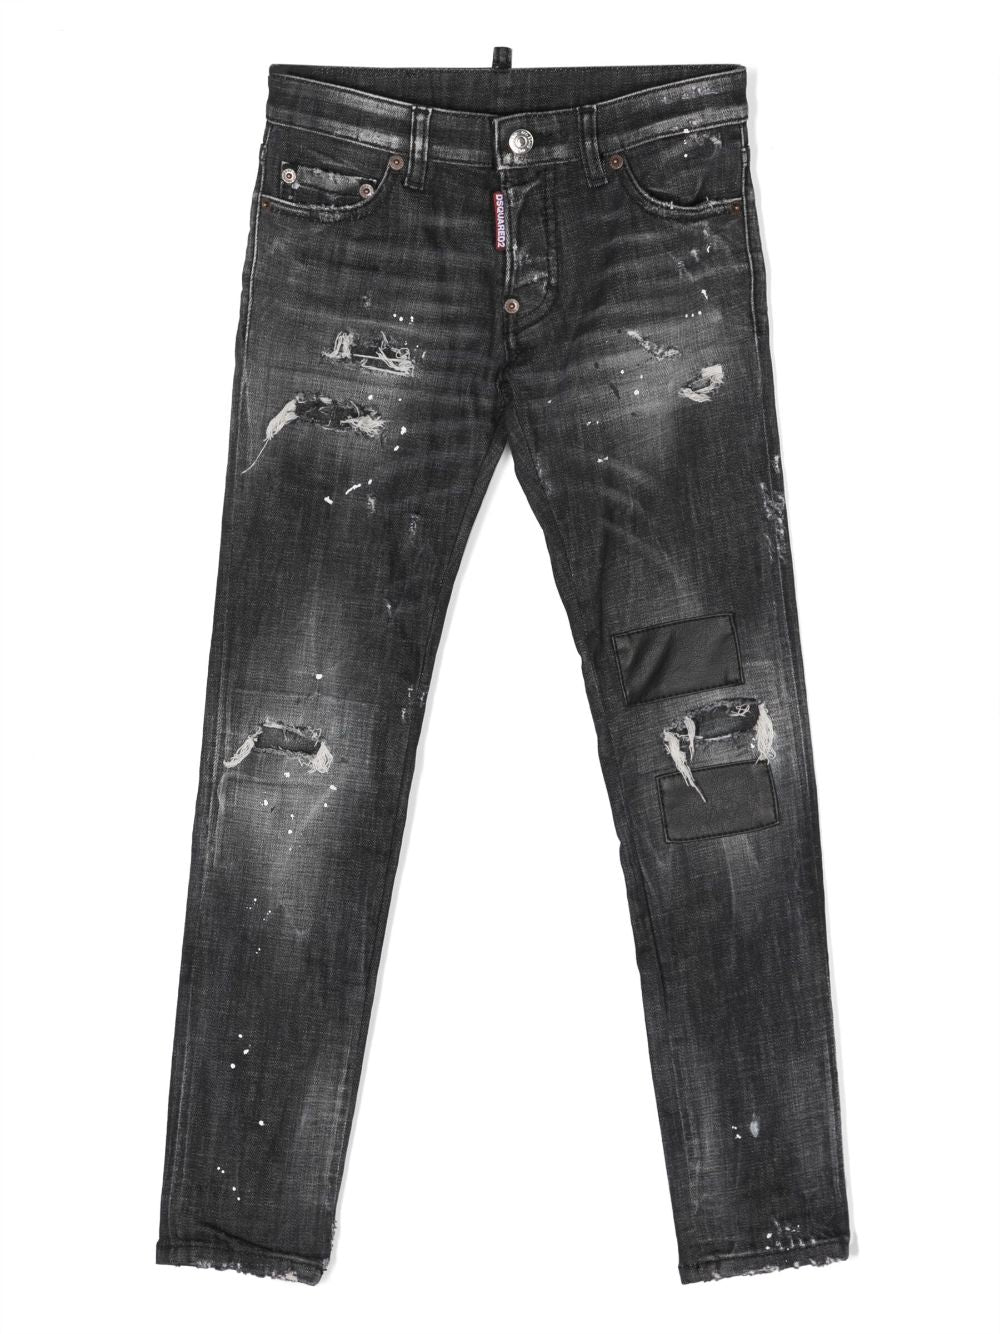 Jeans destroyed e vernice bambino slim fit